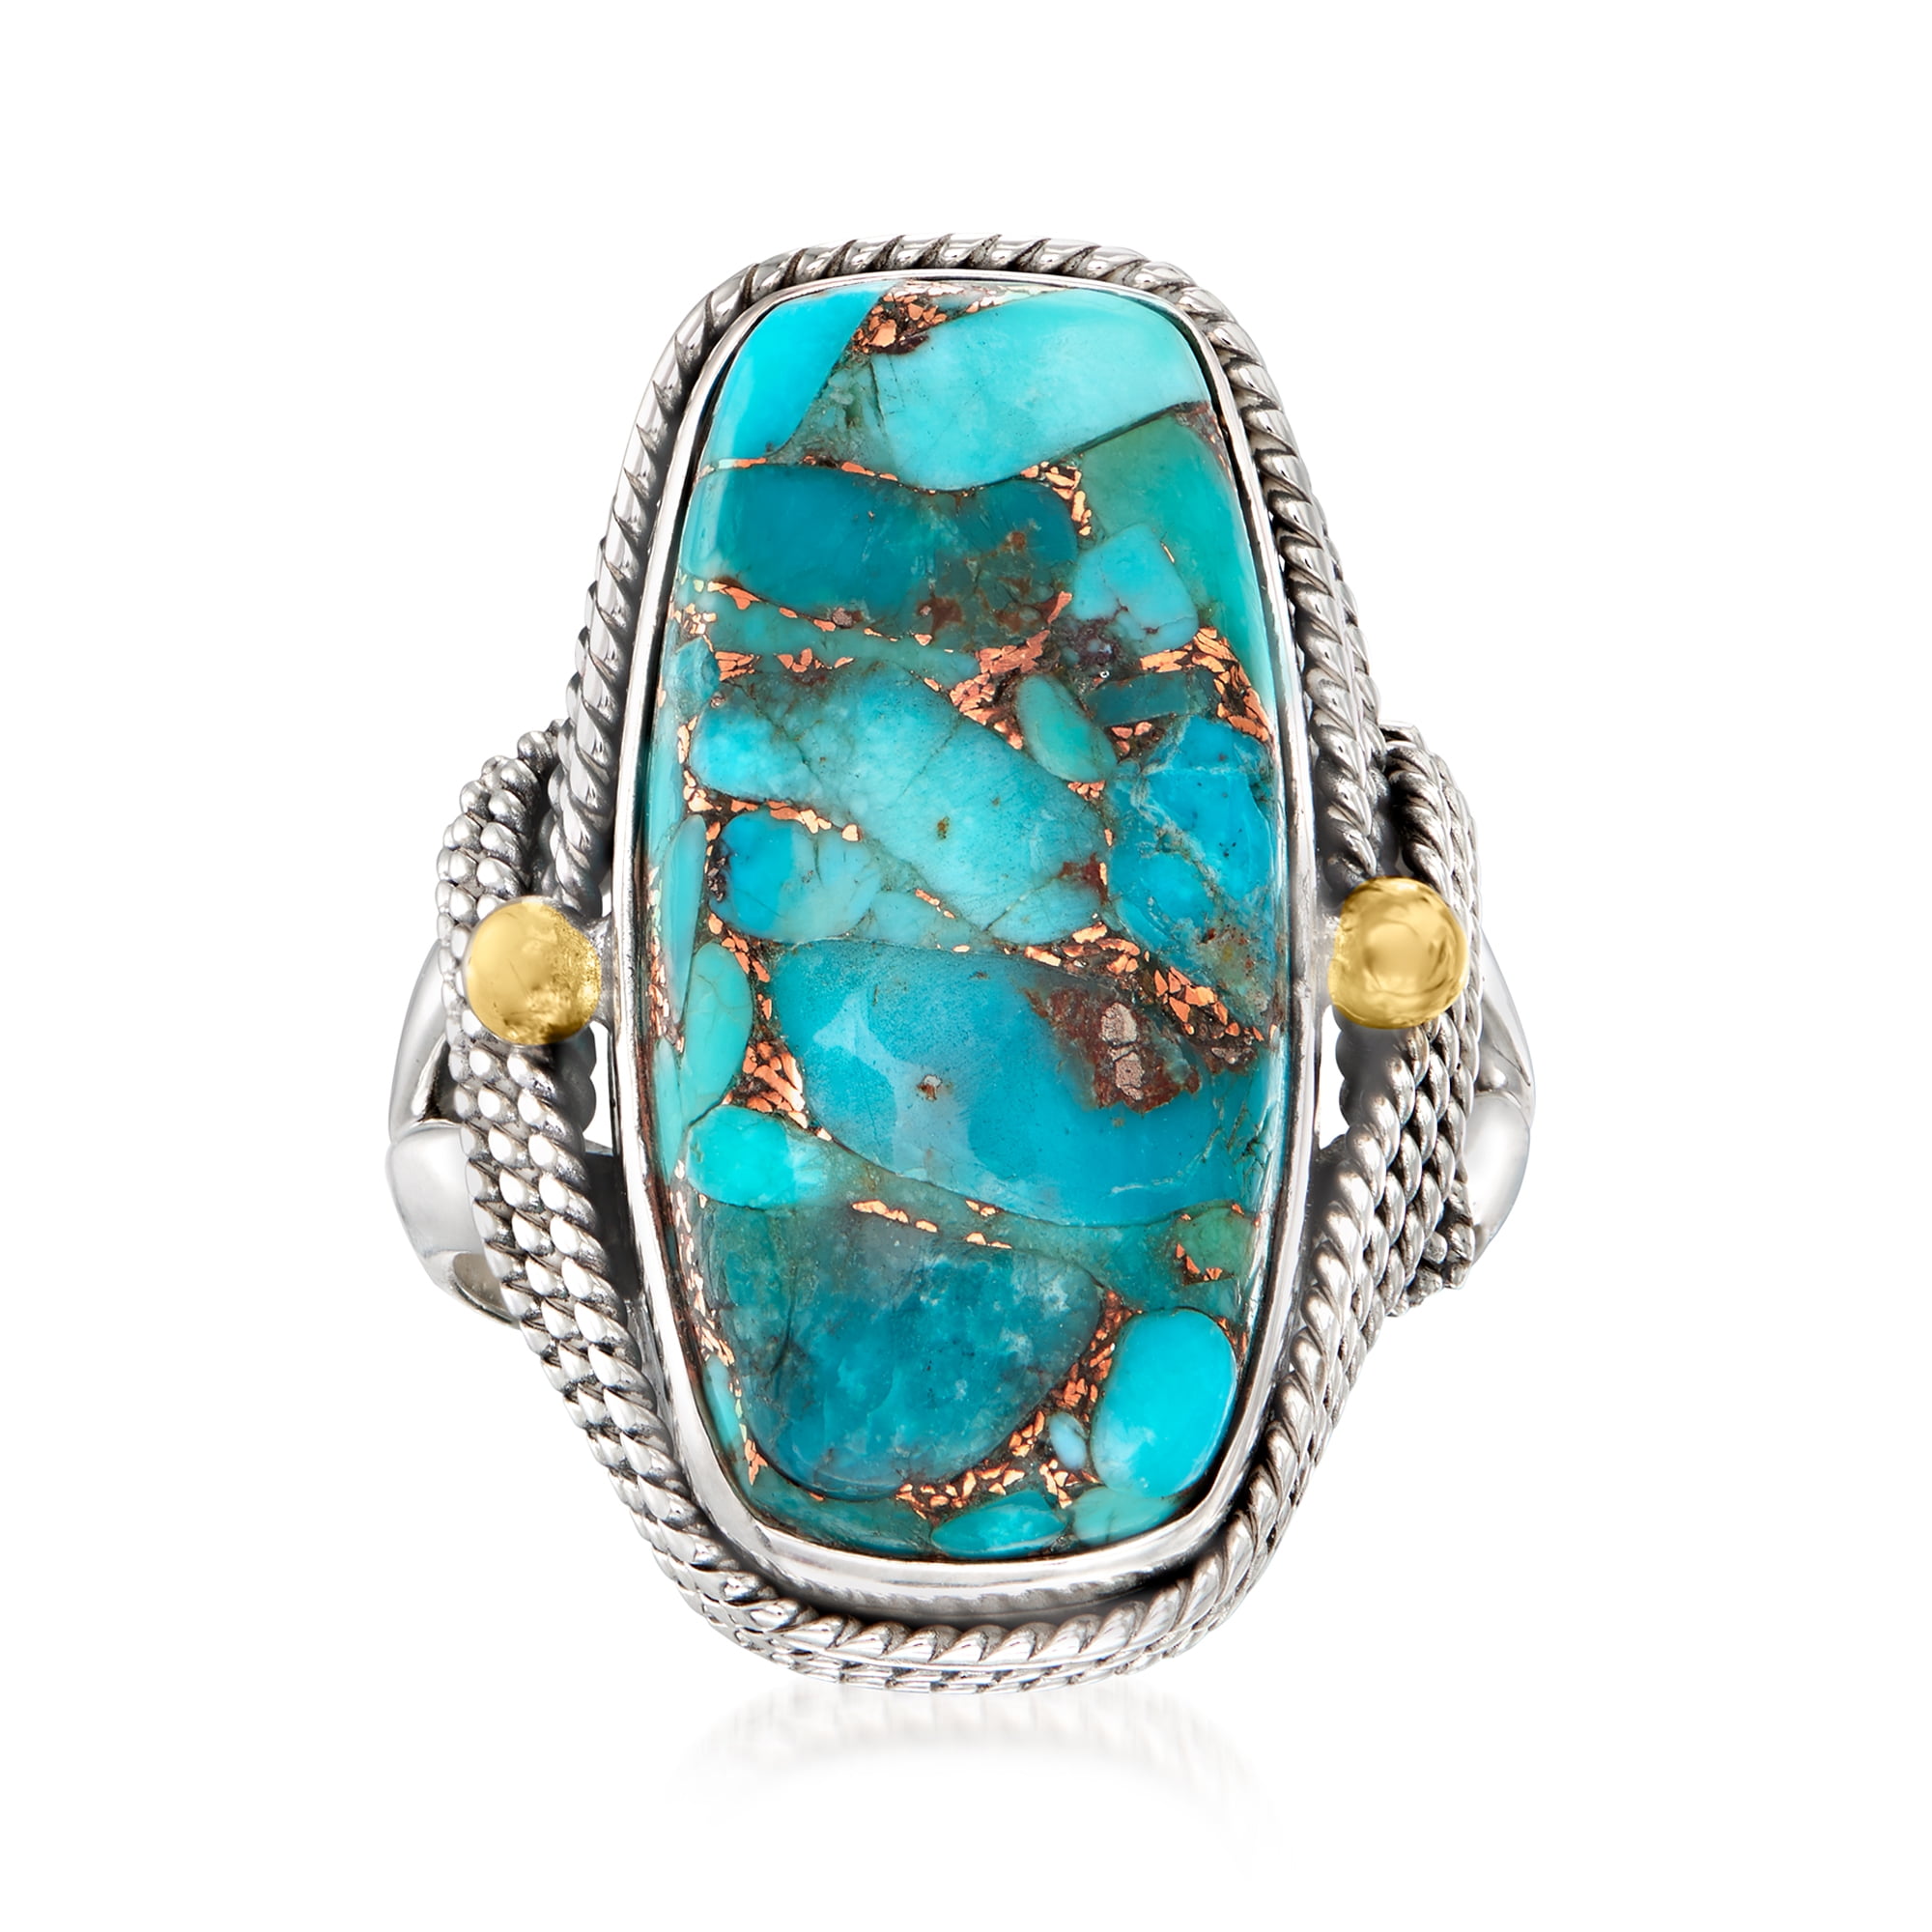 Blue Copper Turquoise Matrix 925 Sterling Silver Ring Jewelry